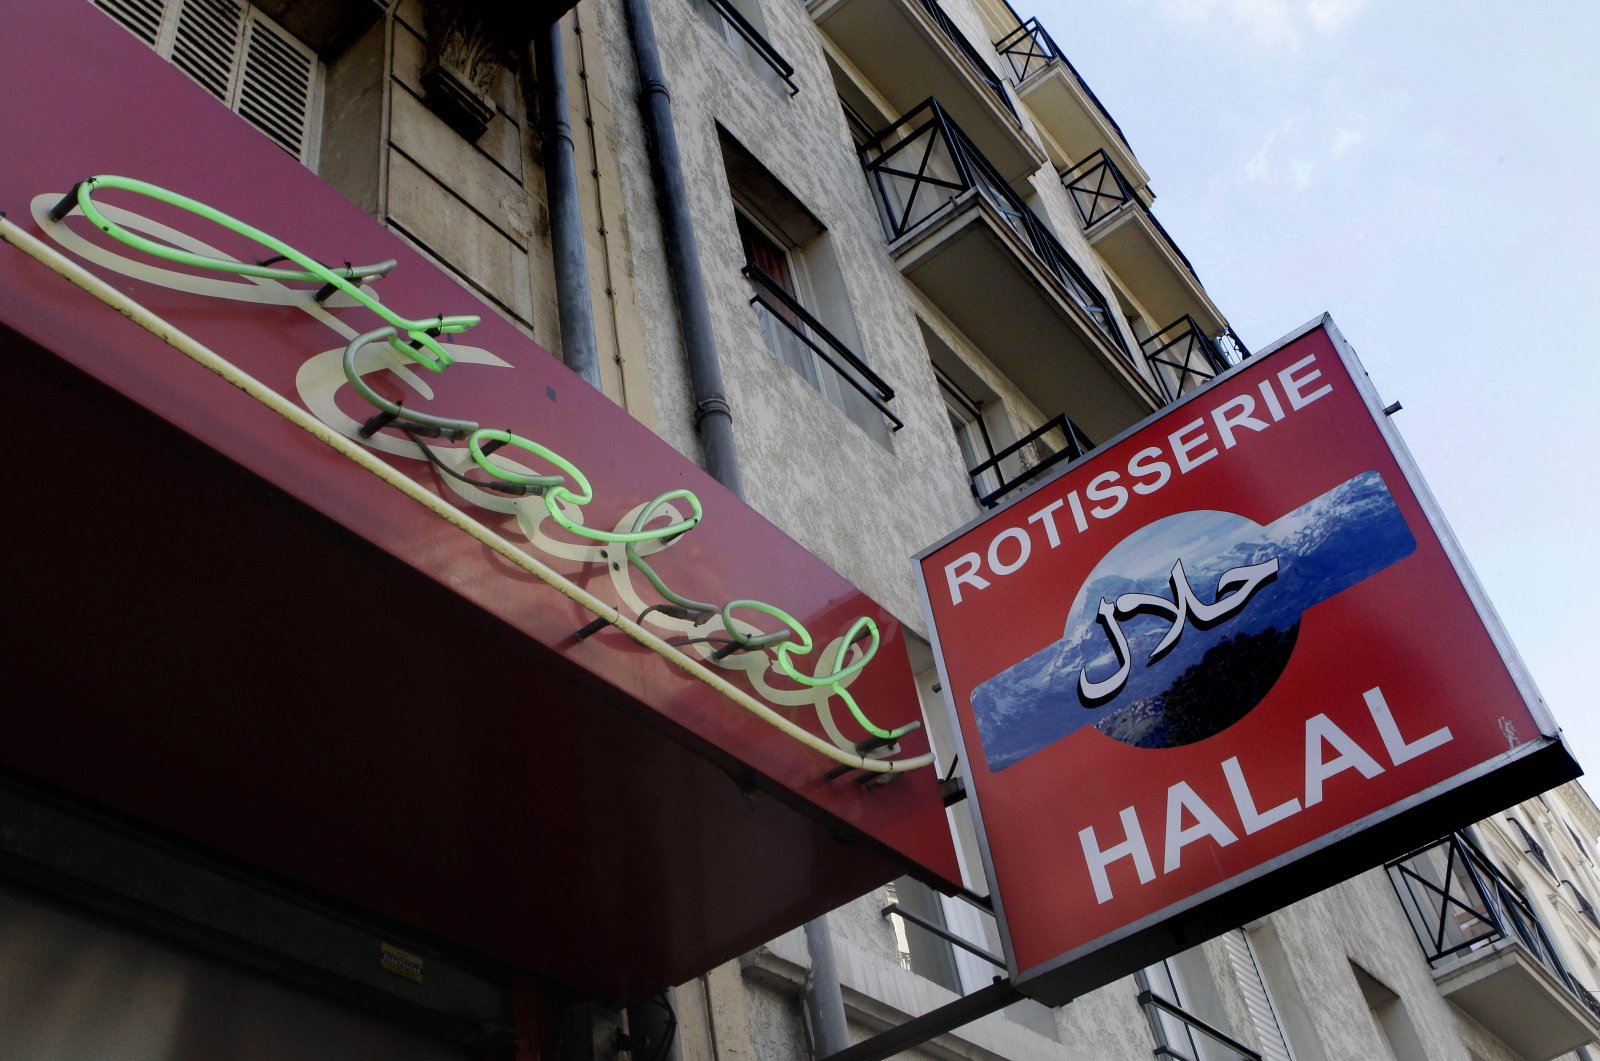 Halal signs are seen at a butcher shop in Paris, France, March 9, 2012. (AP File Photo)